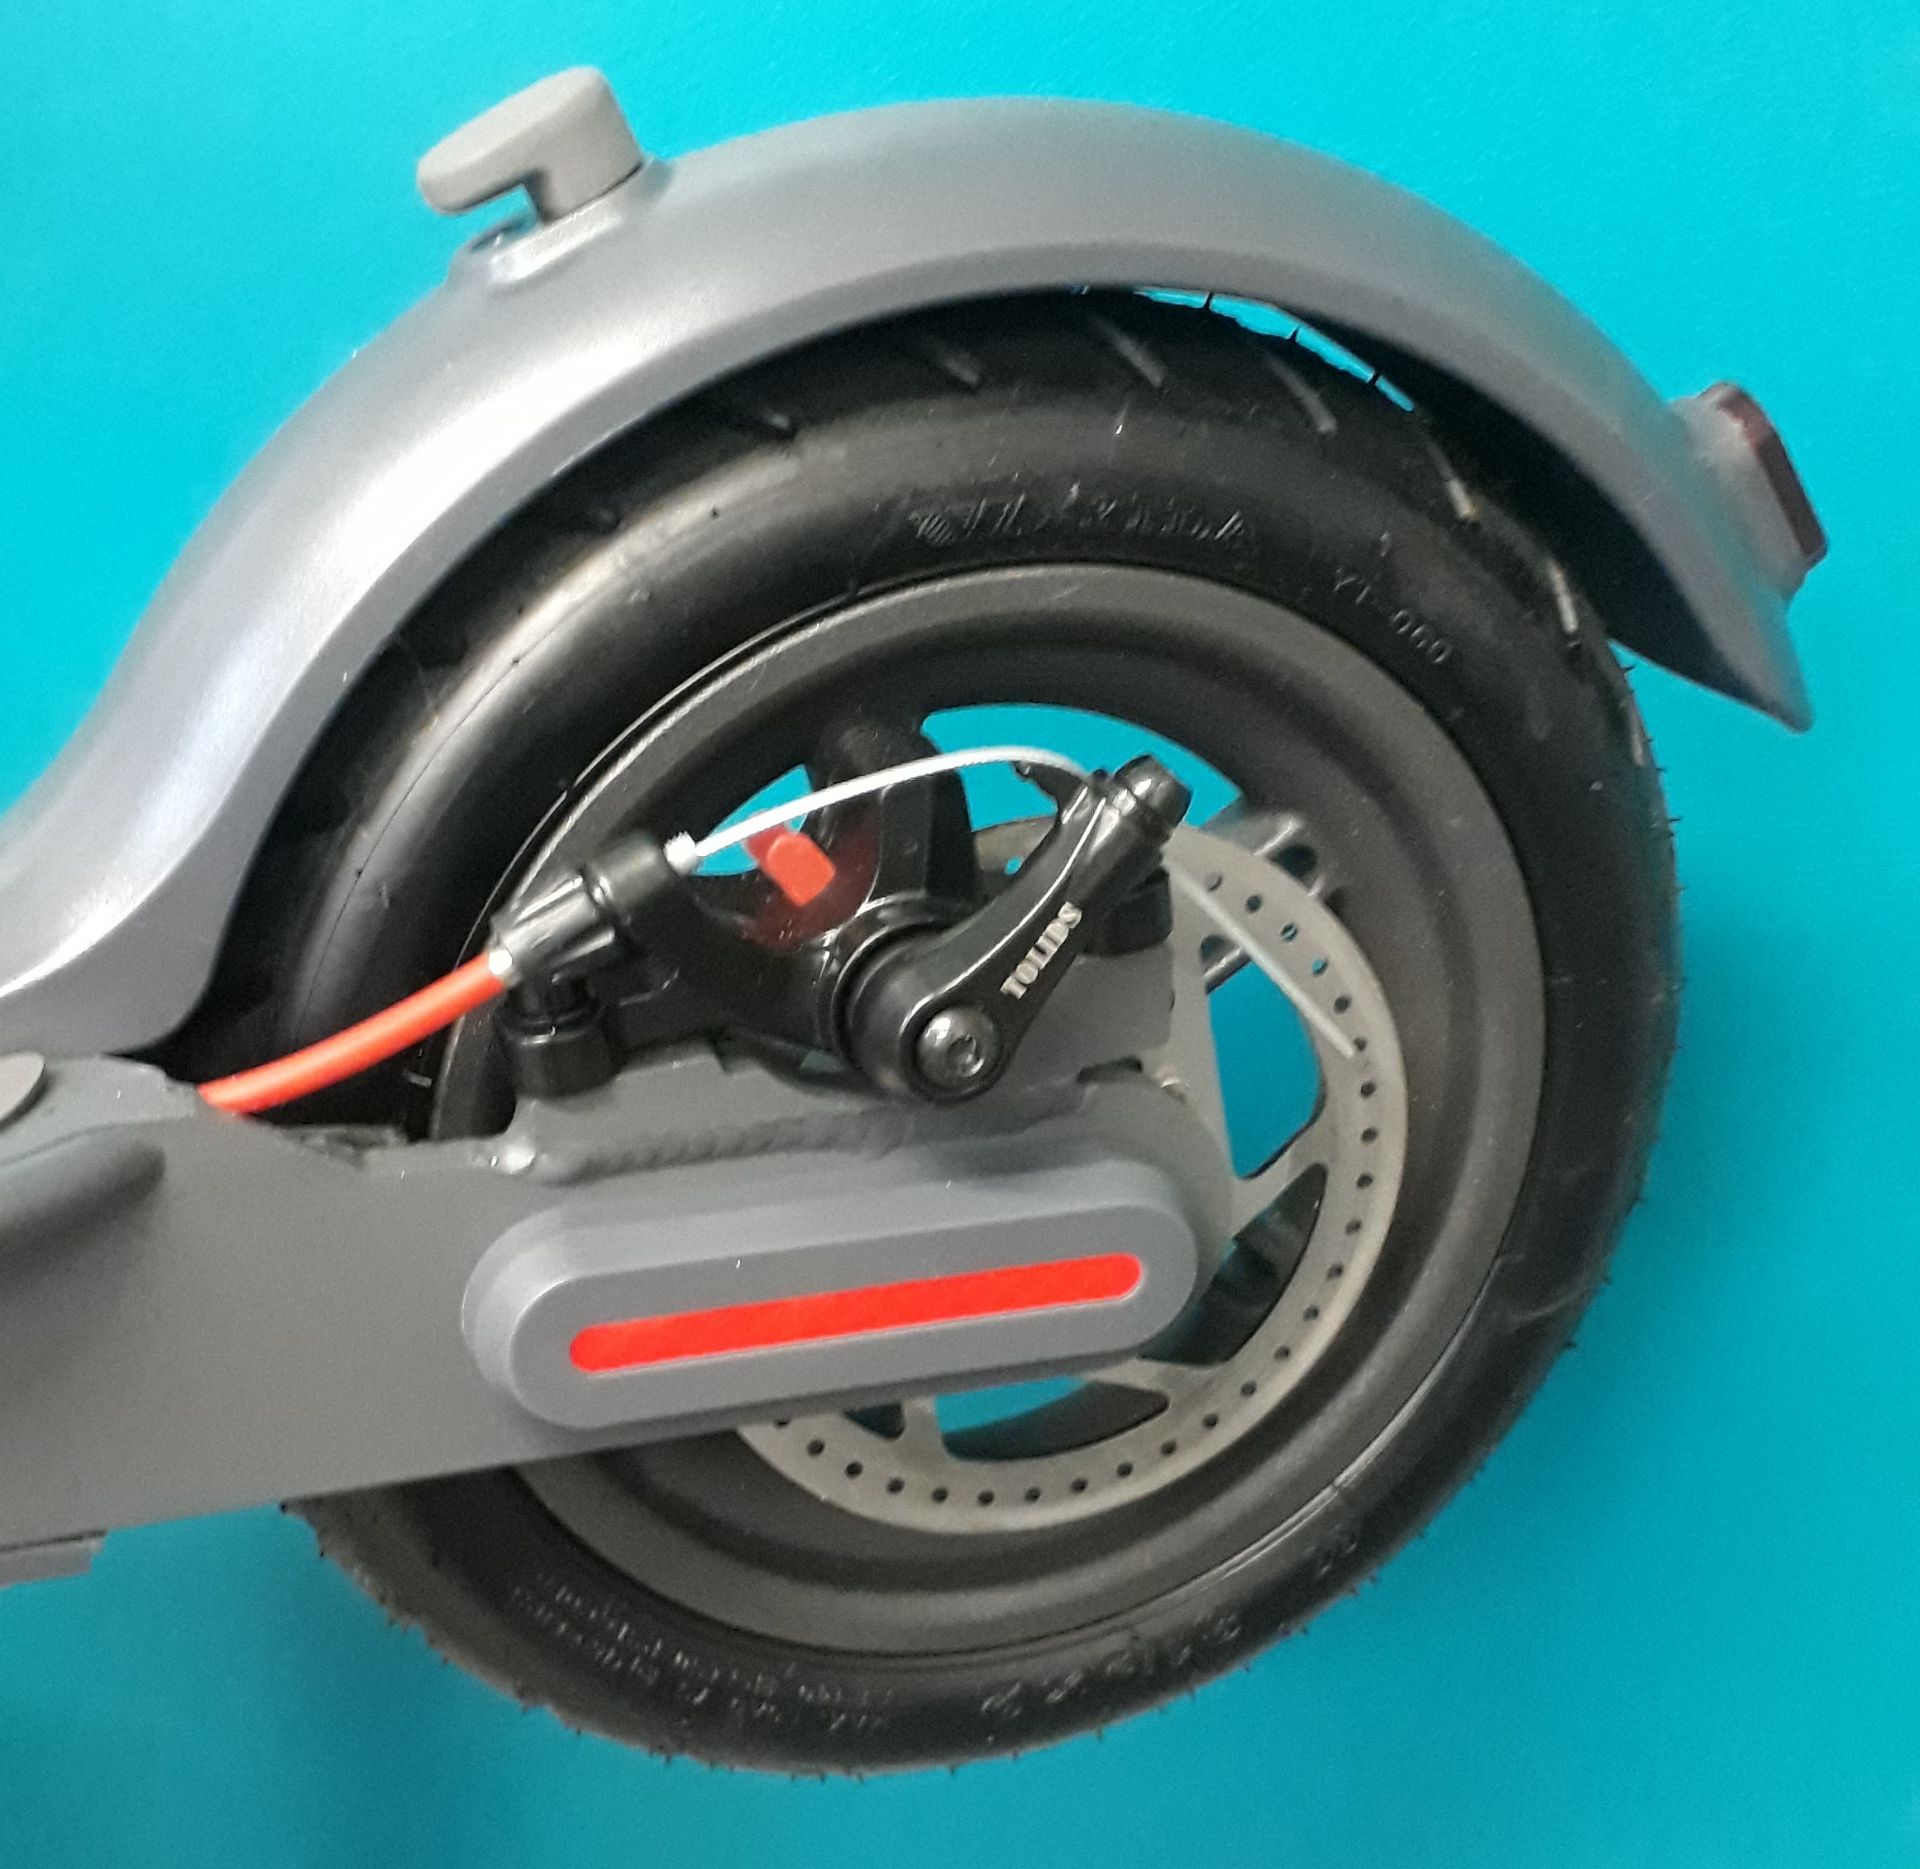 + VAT Hush Foldable Electric Scooter - Three Speeds - Max Speed 25Km/H - ABS Disc Brakes - Range - Image 4 of 4